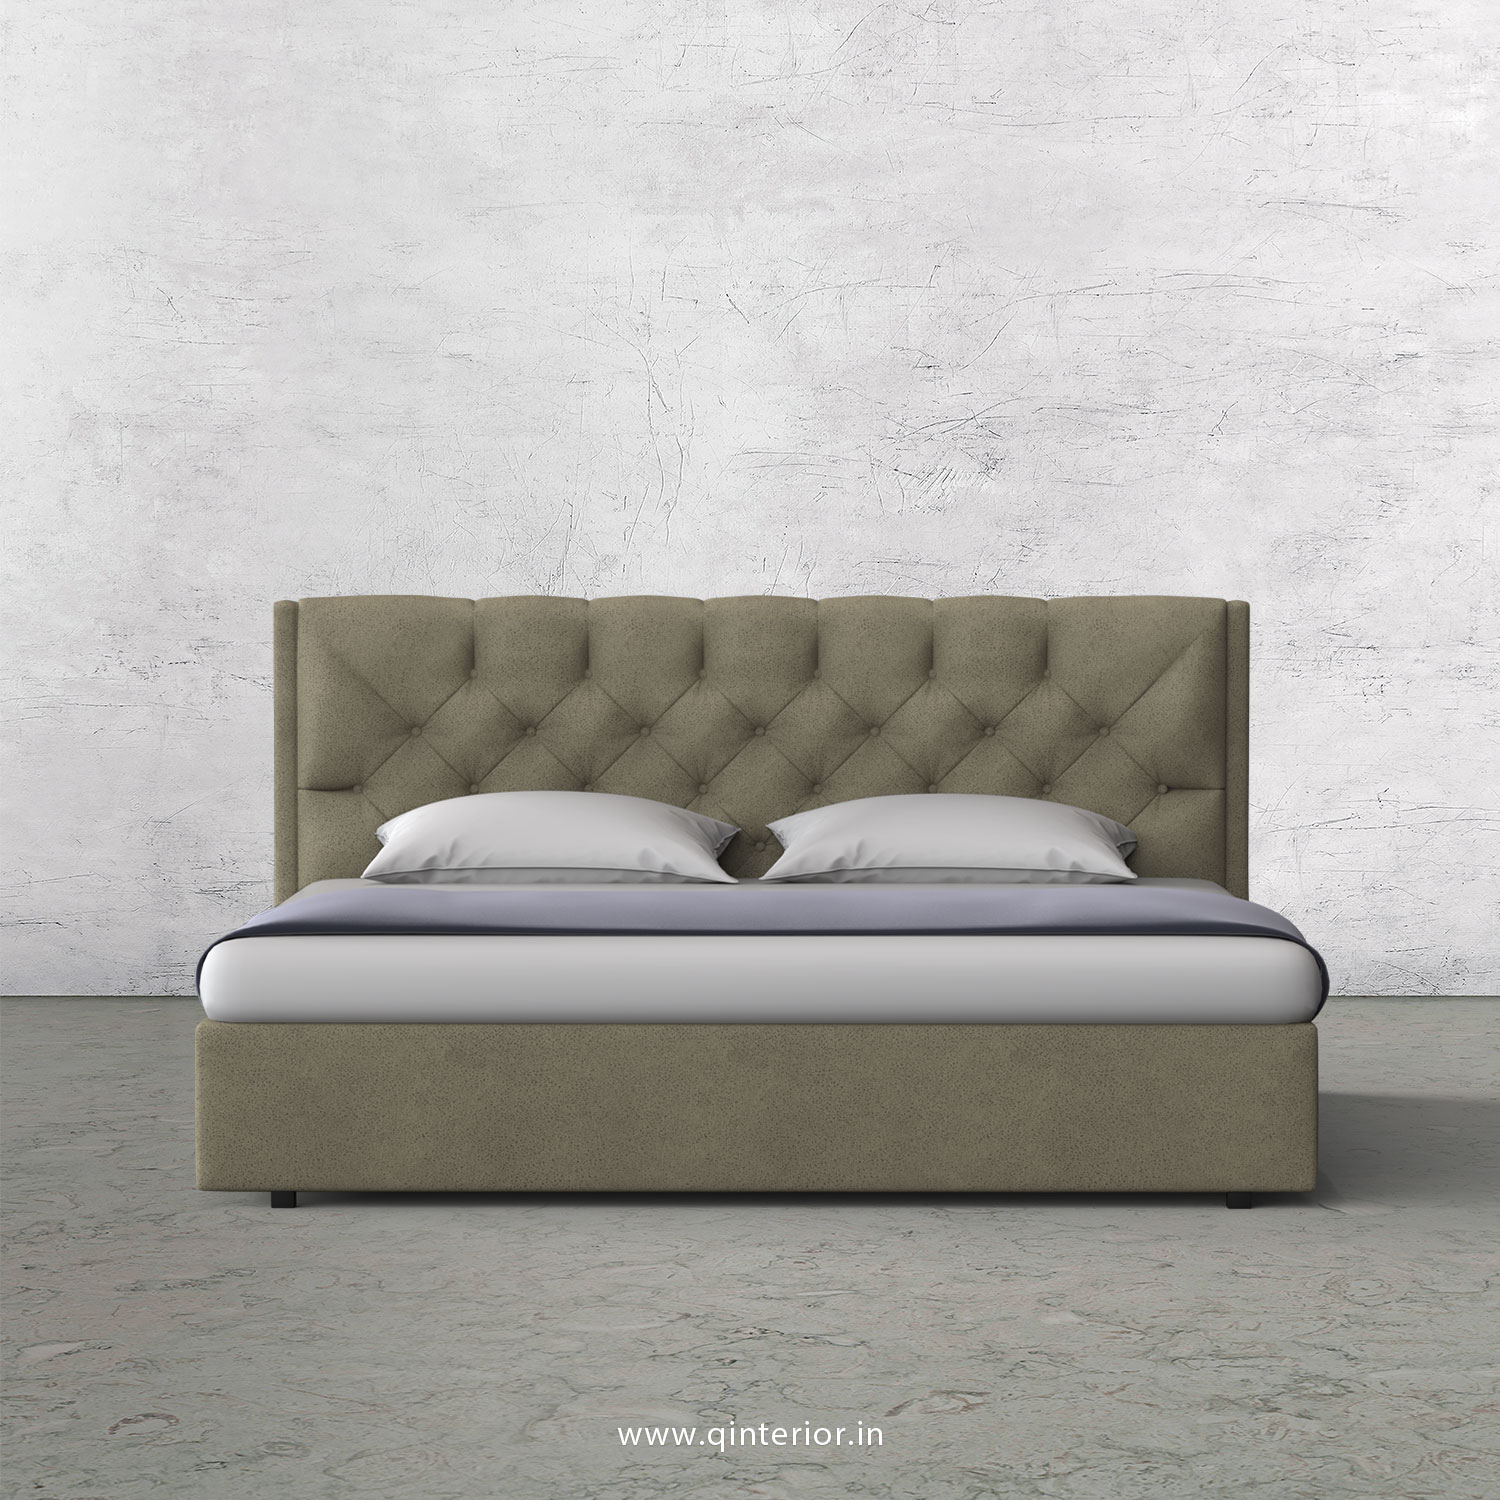 Scorpius Queen Bed in Fab Leather Fabric - QBD009 FL10